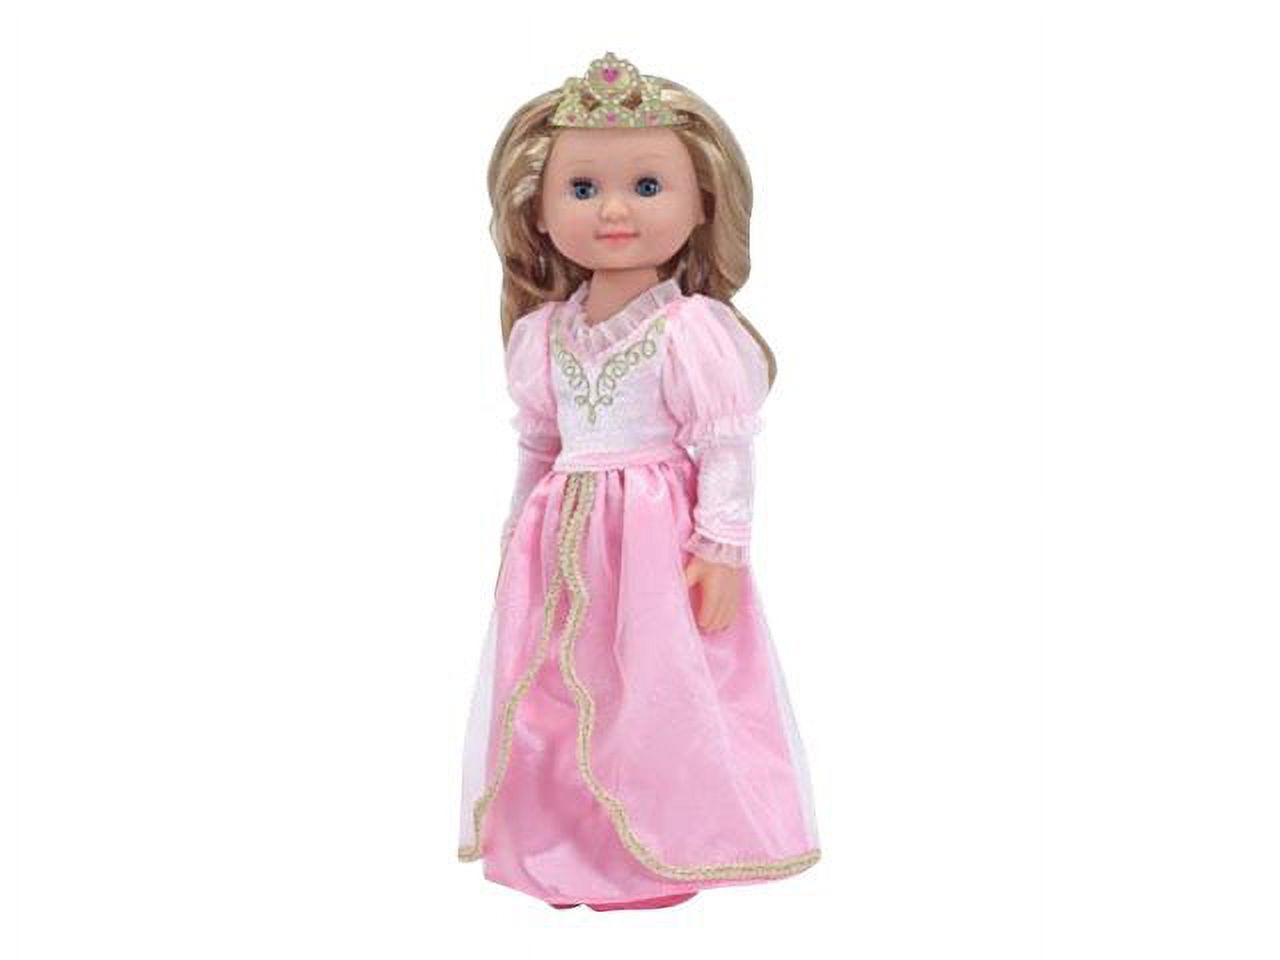 Melissa & Doug Celeste 14-Inch Poseable Princess Doll With Pink Gown and Tiara - image 2 of 2